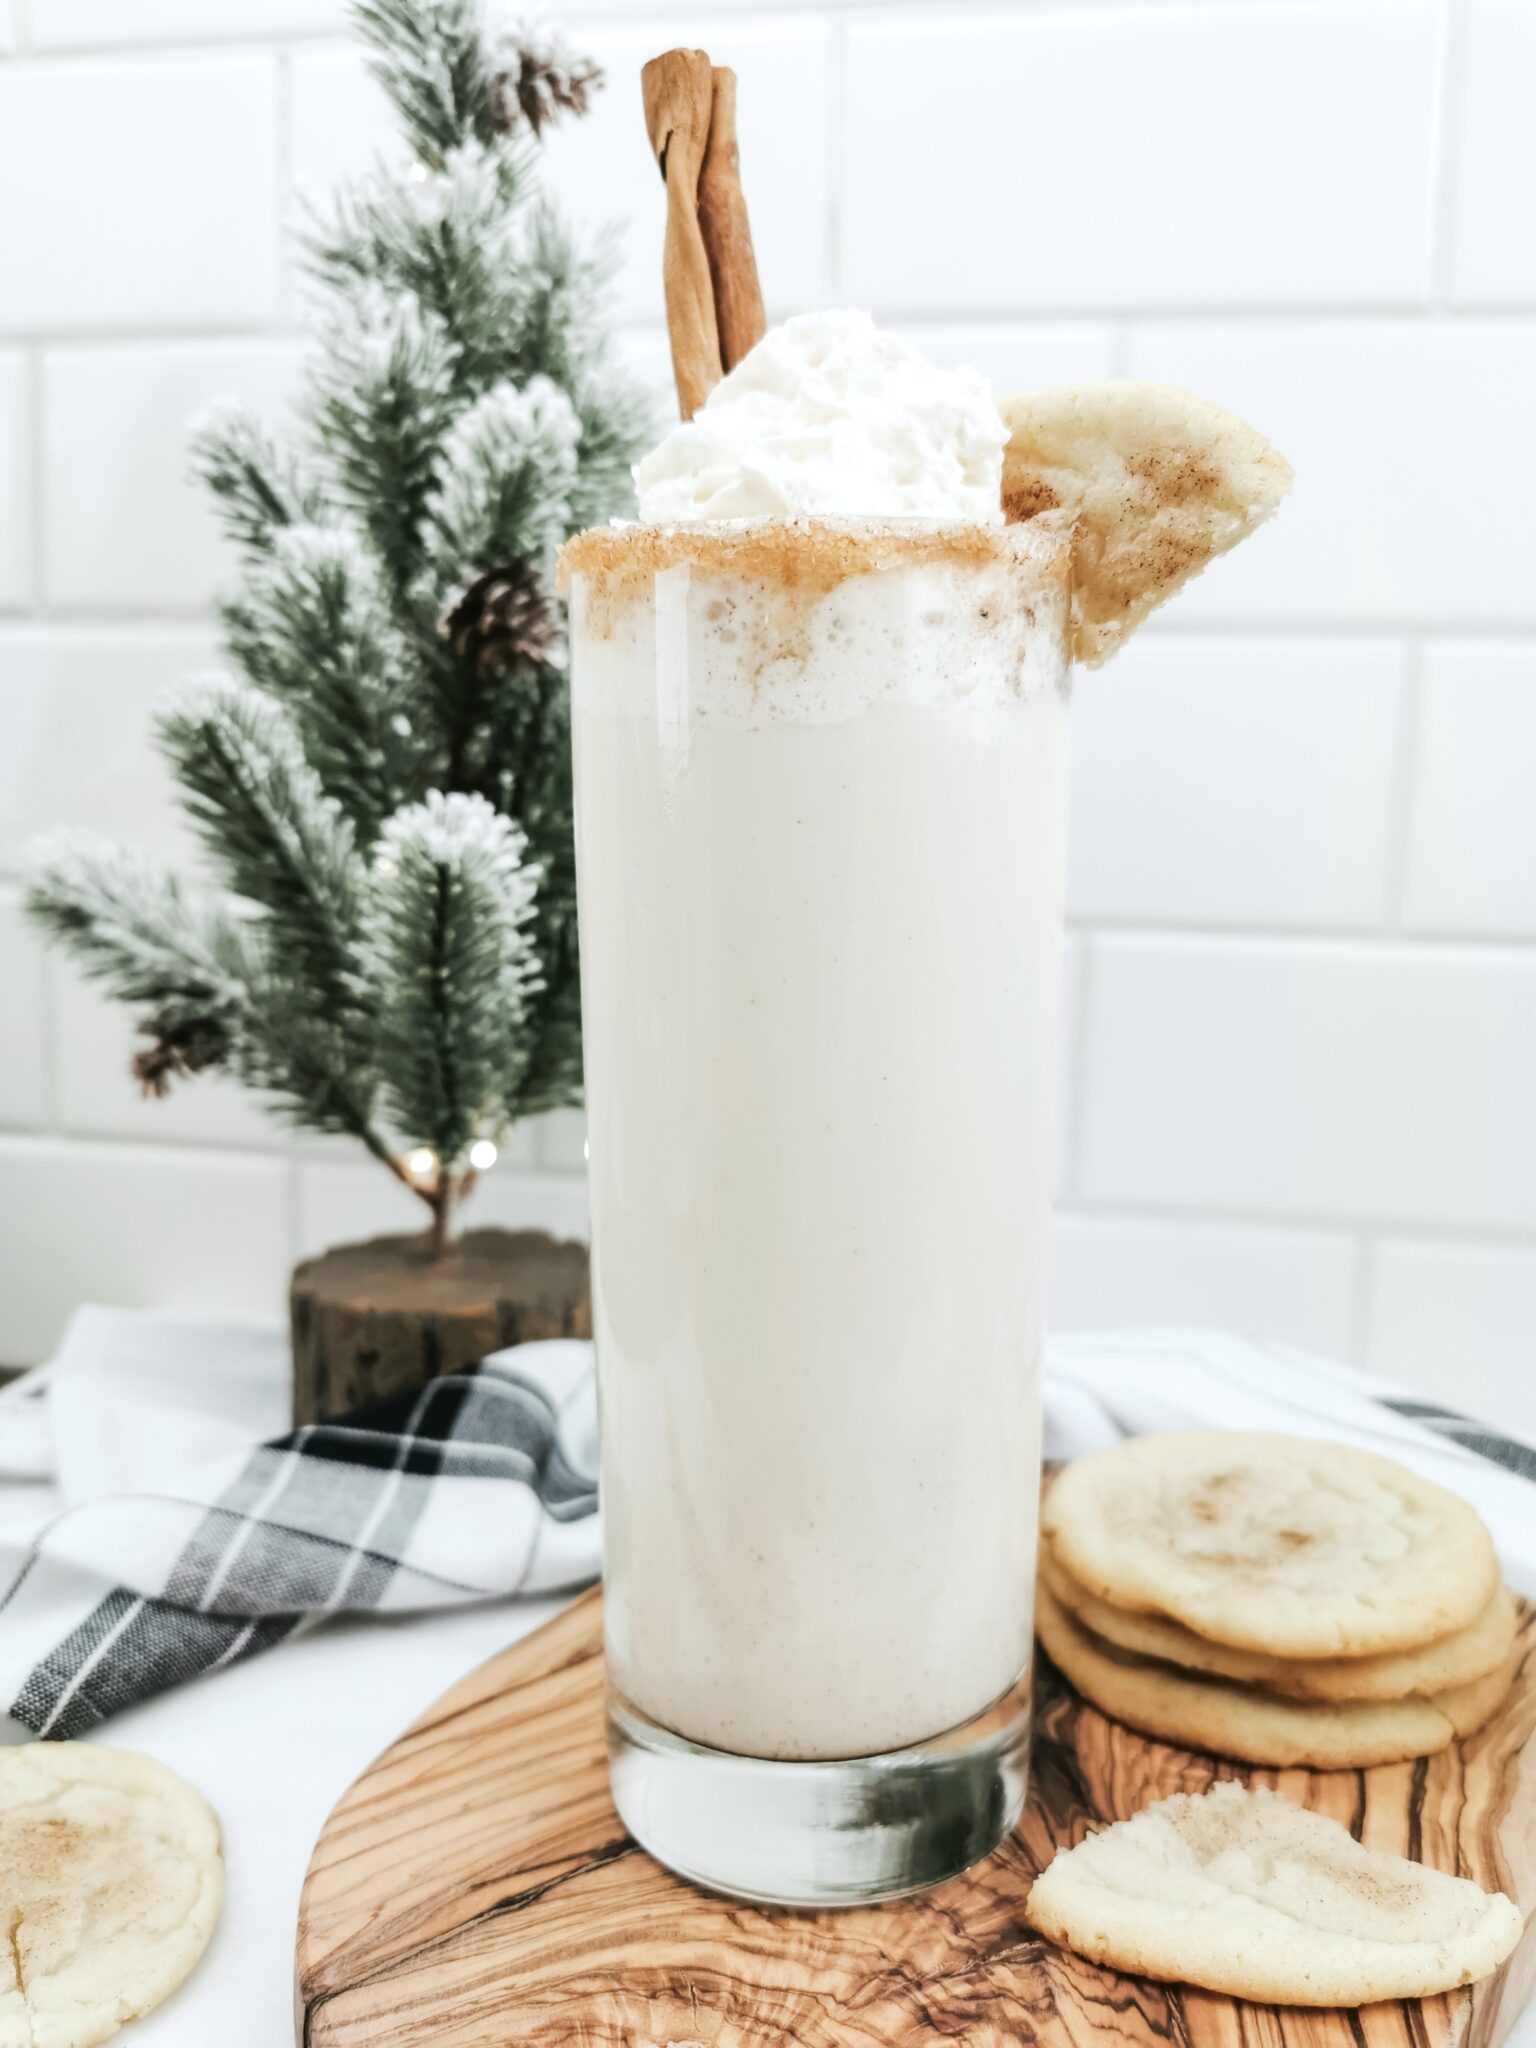 A tall glass filled with caramel protein shake, mixed with cinnamon and Torani sugar-free syrup. It is the festive Caramel Snickerdoodle Mocktail.